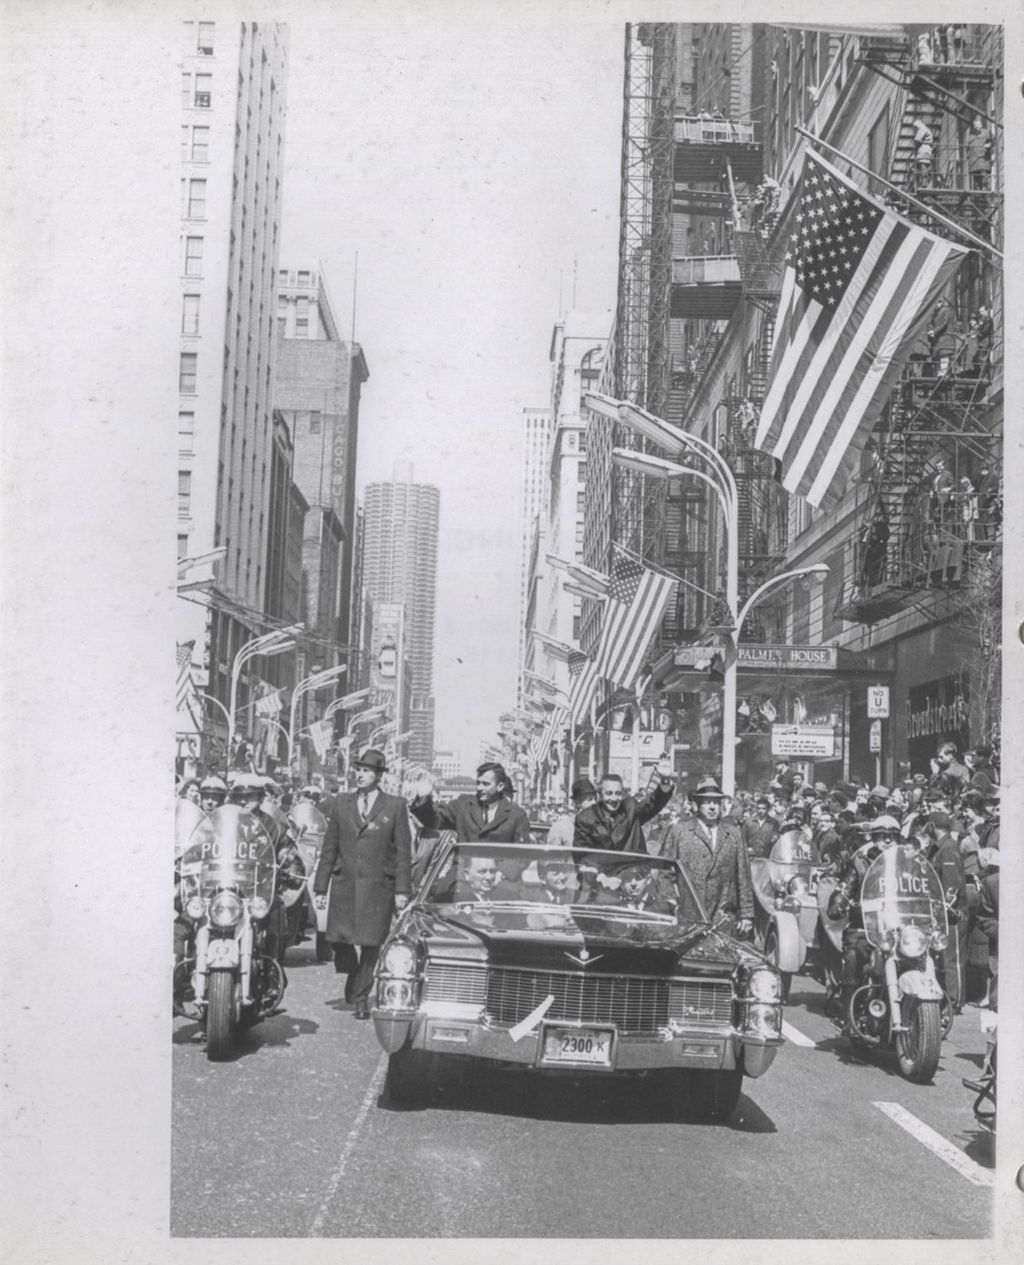 Astronauts Young and Grissom waving to the crowd during a parade